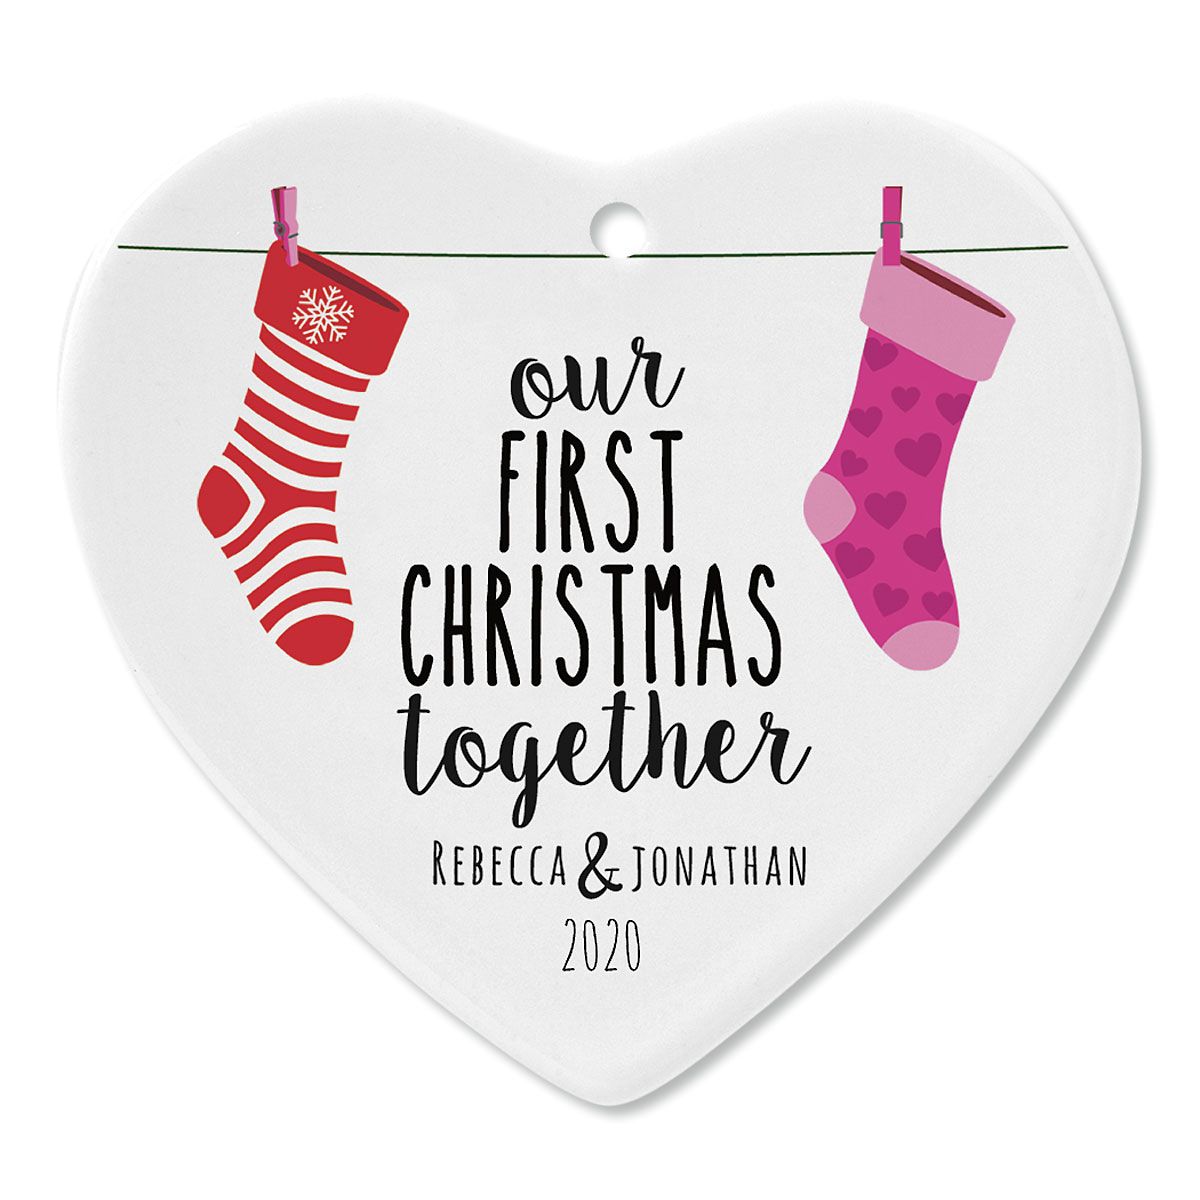 First Christmas Together Ceramic Personalized Christmas Ornaments